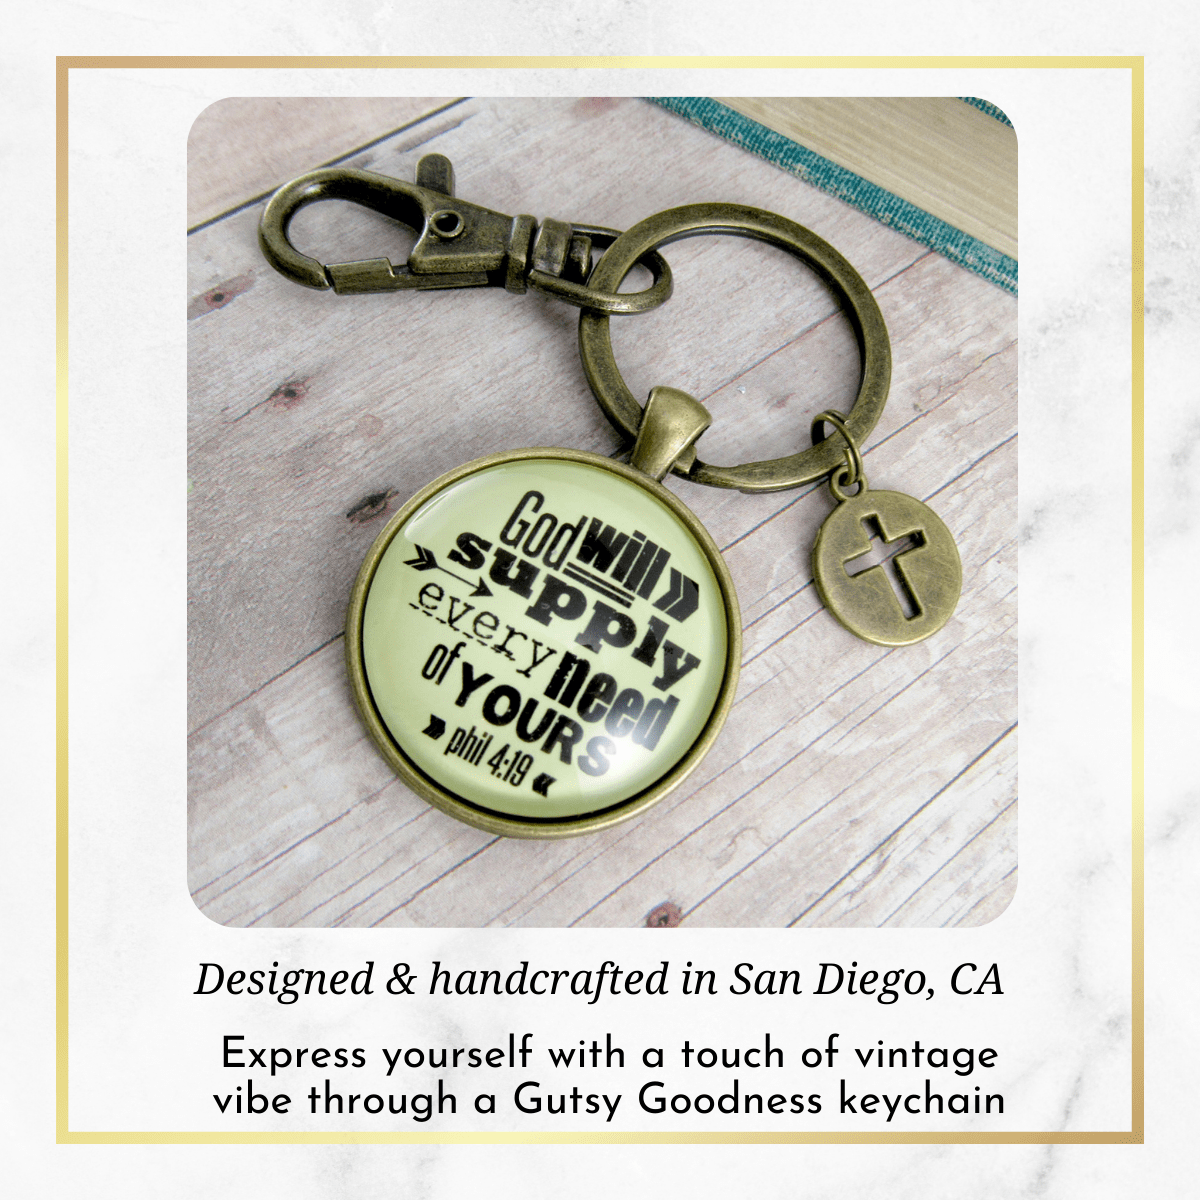 God's Promise Keychain God Will Supply Every Need Of Yours Bold Religious Bible Quote Jewelry - Gutsy Goodness Handmade Jewelry;God's Promise Keychain God Will Supply Every Need Of Yours Bold Religious Bible Quote Jewelry - Gutsy Goodness Handmade Jewelry Gifts